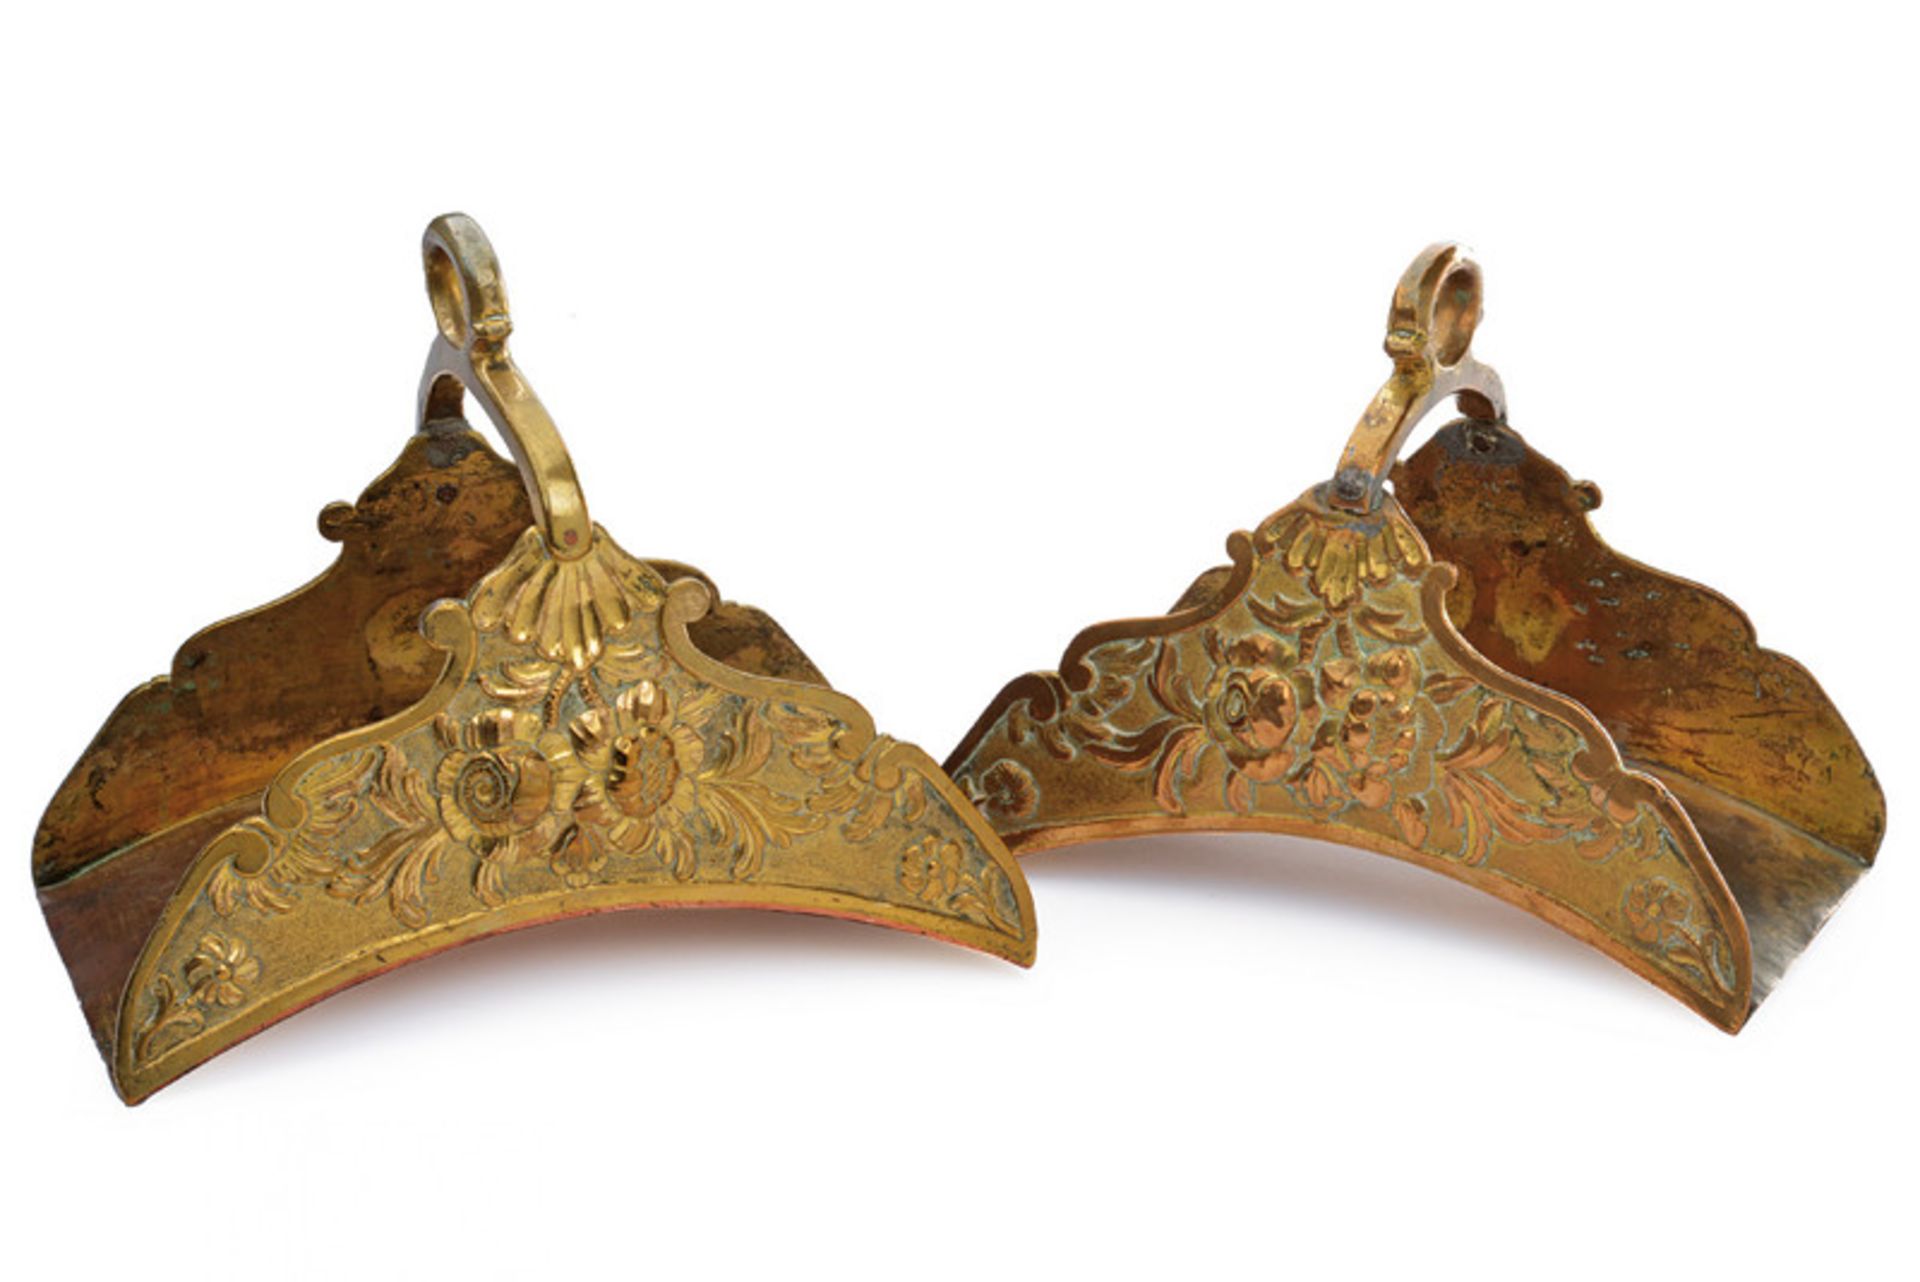 A fine and rare pair of Mameluke stirrups , dating: late 17th Century, provenance: Ottoman Empire,